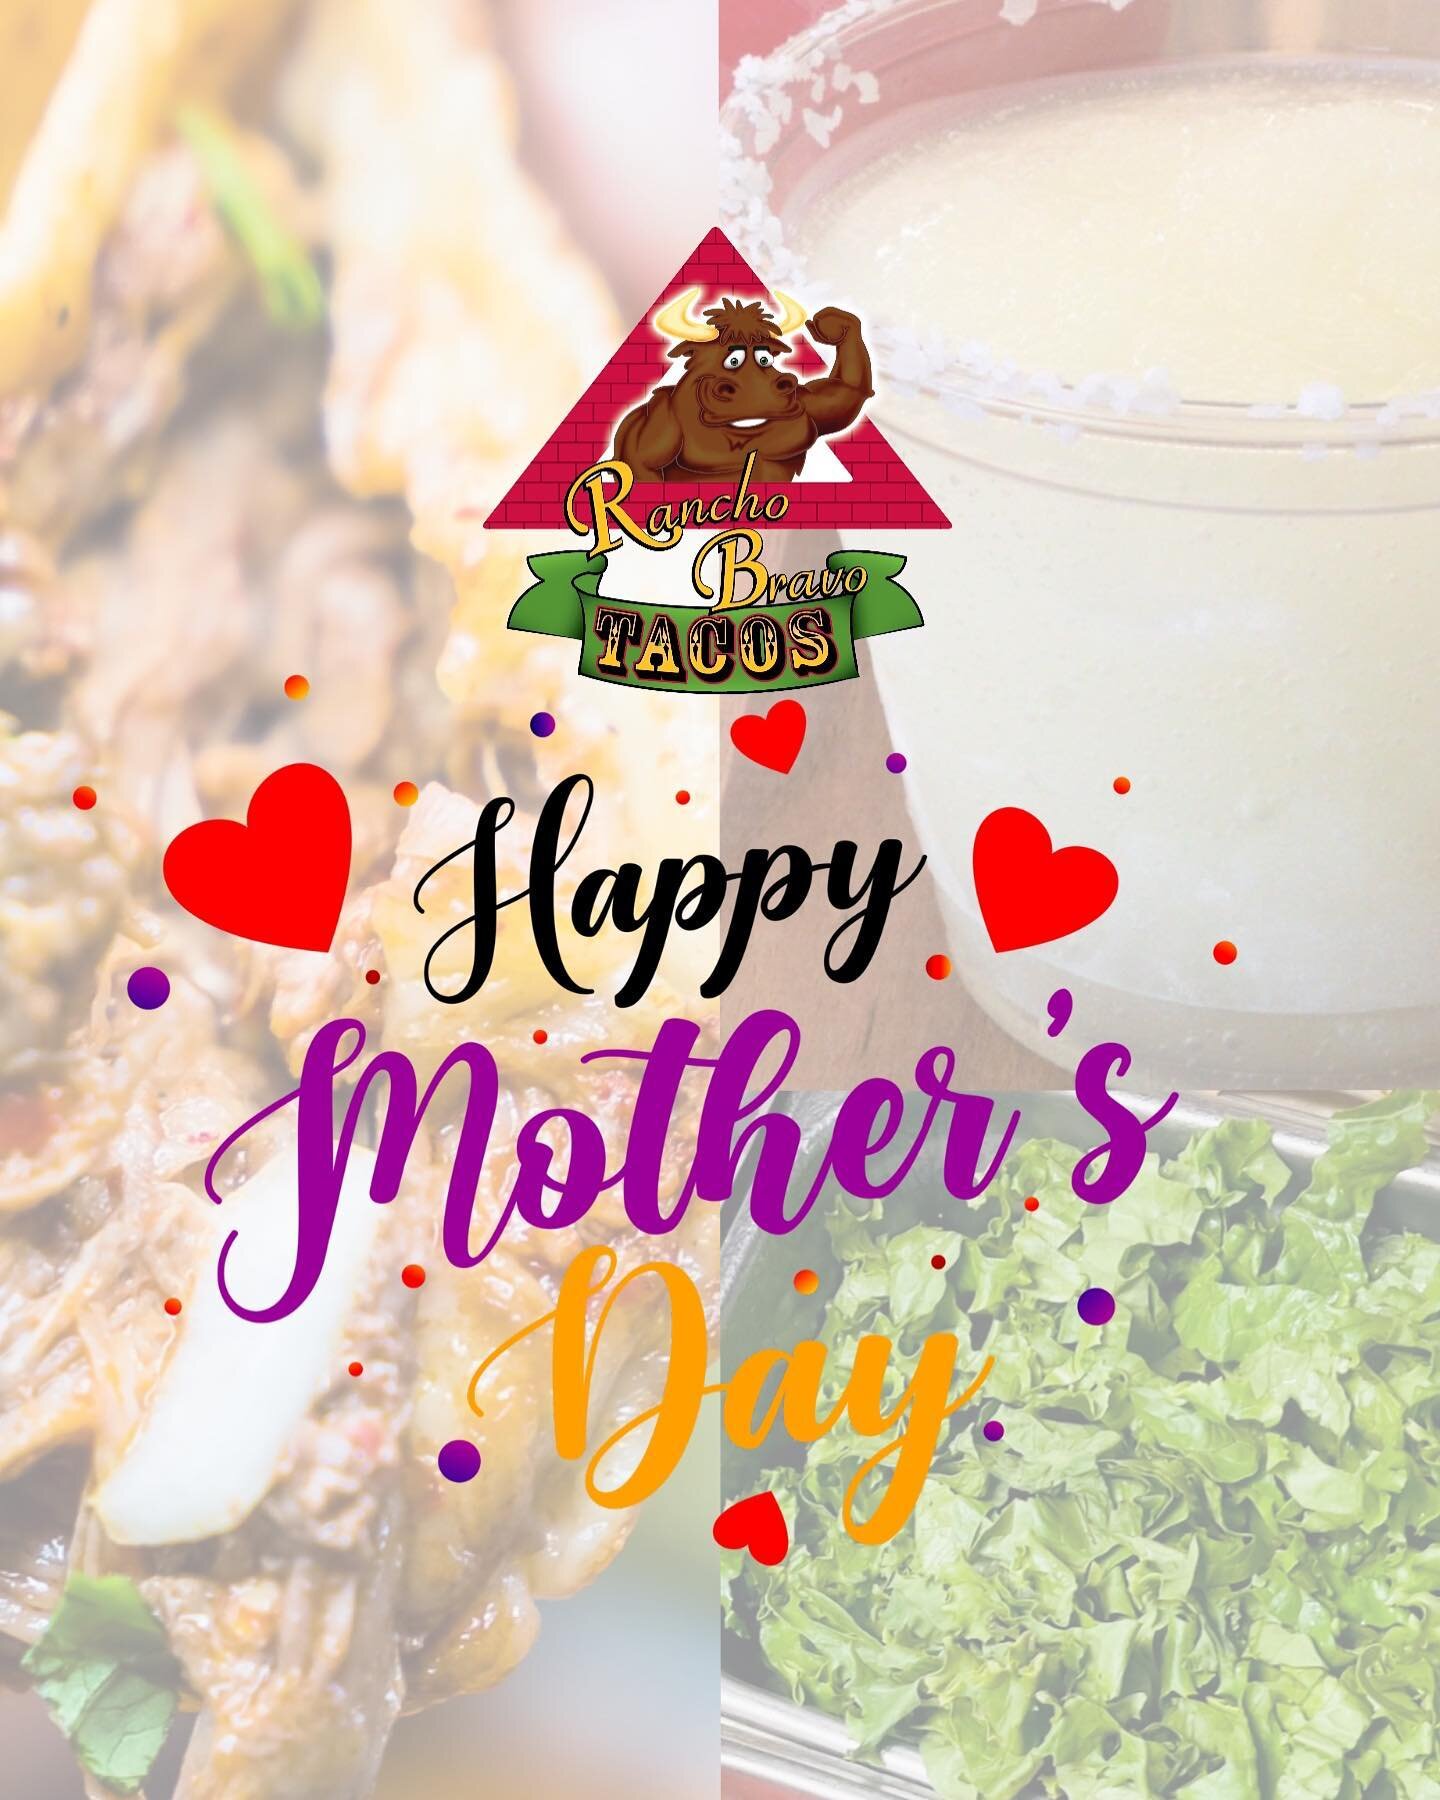 Get mom some tacos and a margarita.
Feliz d&iacute;a de las Madres!

#food #foodie #foodsta #hangry #hungry #tbt #seattlefoodie #seattlefood⠀
#eeeeeats #foodietribe #eatseattle #mexicanfood #getinmybelly #dishedseattle #eaterseattle #eater #flavorlic